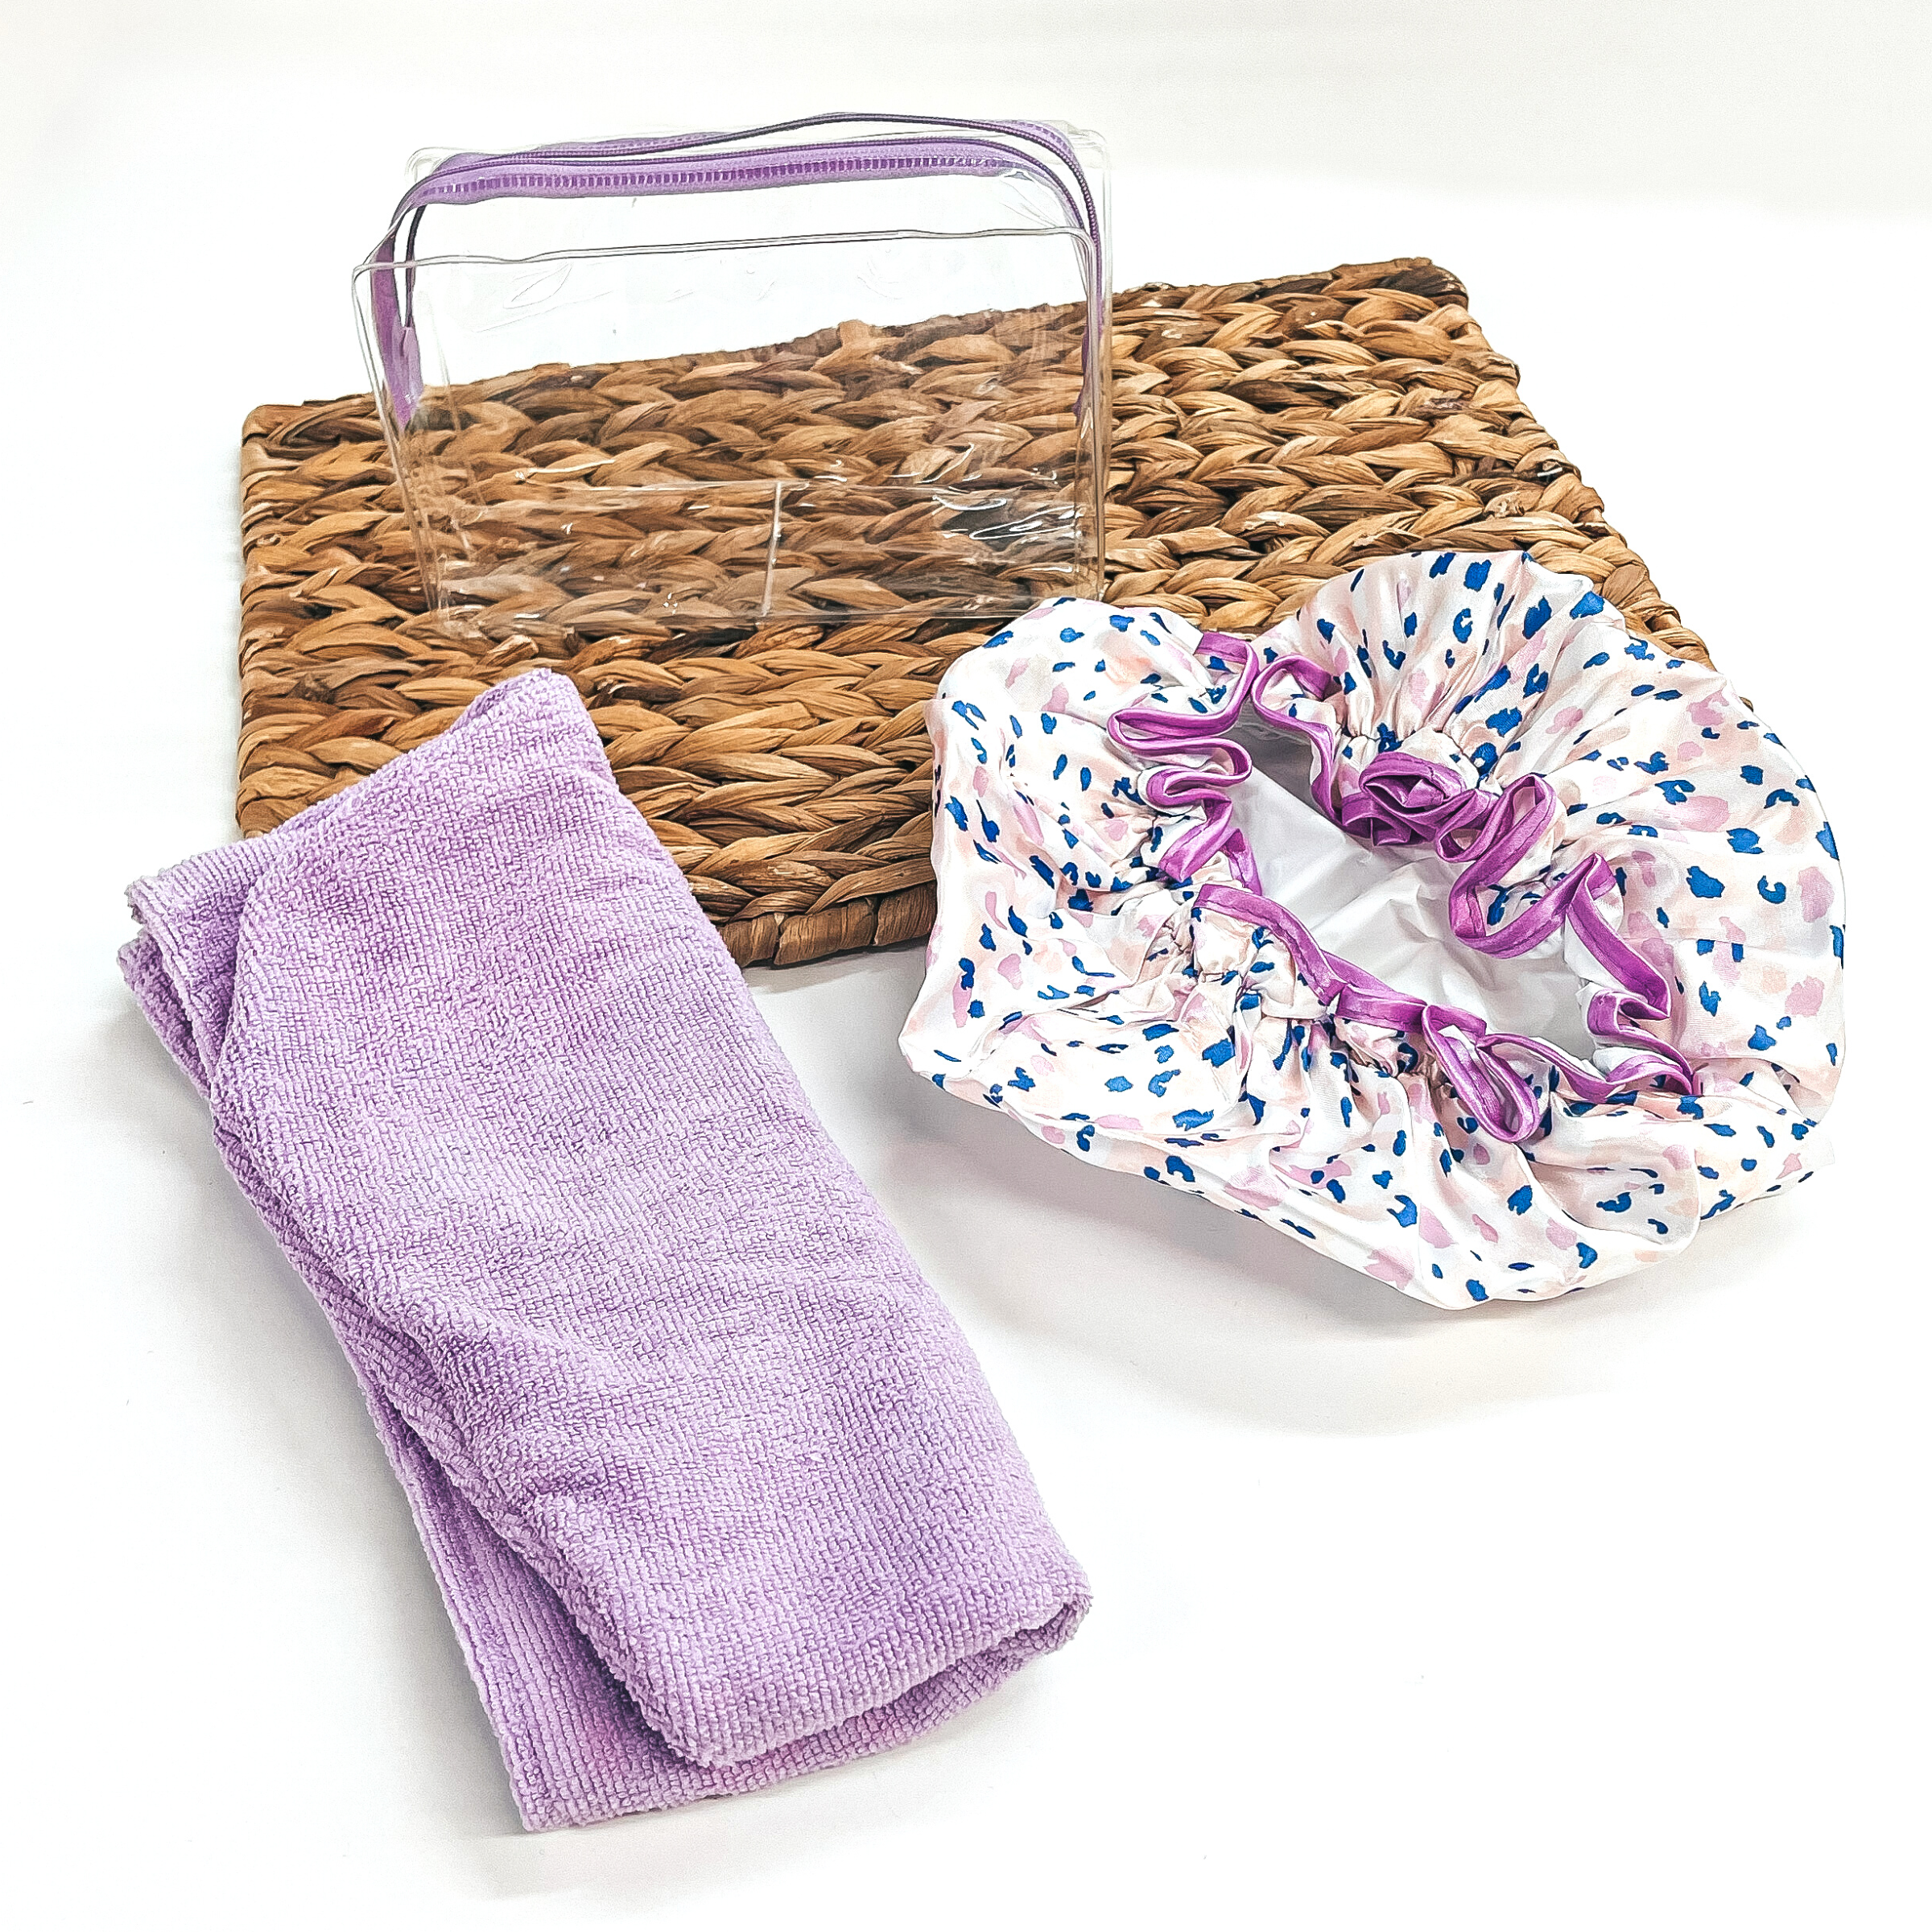 There is a clear bag with a purple lavender zipper on top of a brown woven slate.  There is a purple hair turban and a pink and purple leopard print shower cap laying  partly on a brown woven slate and on a white background.